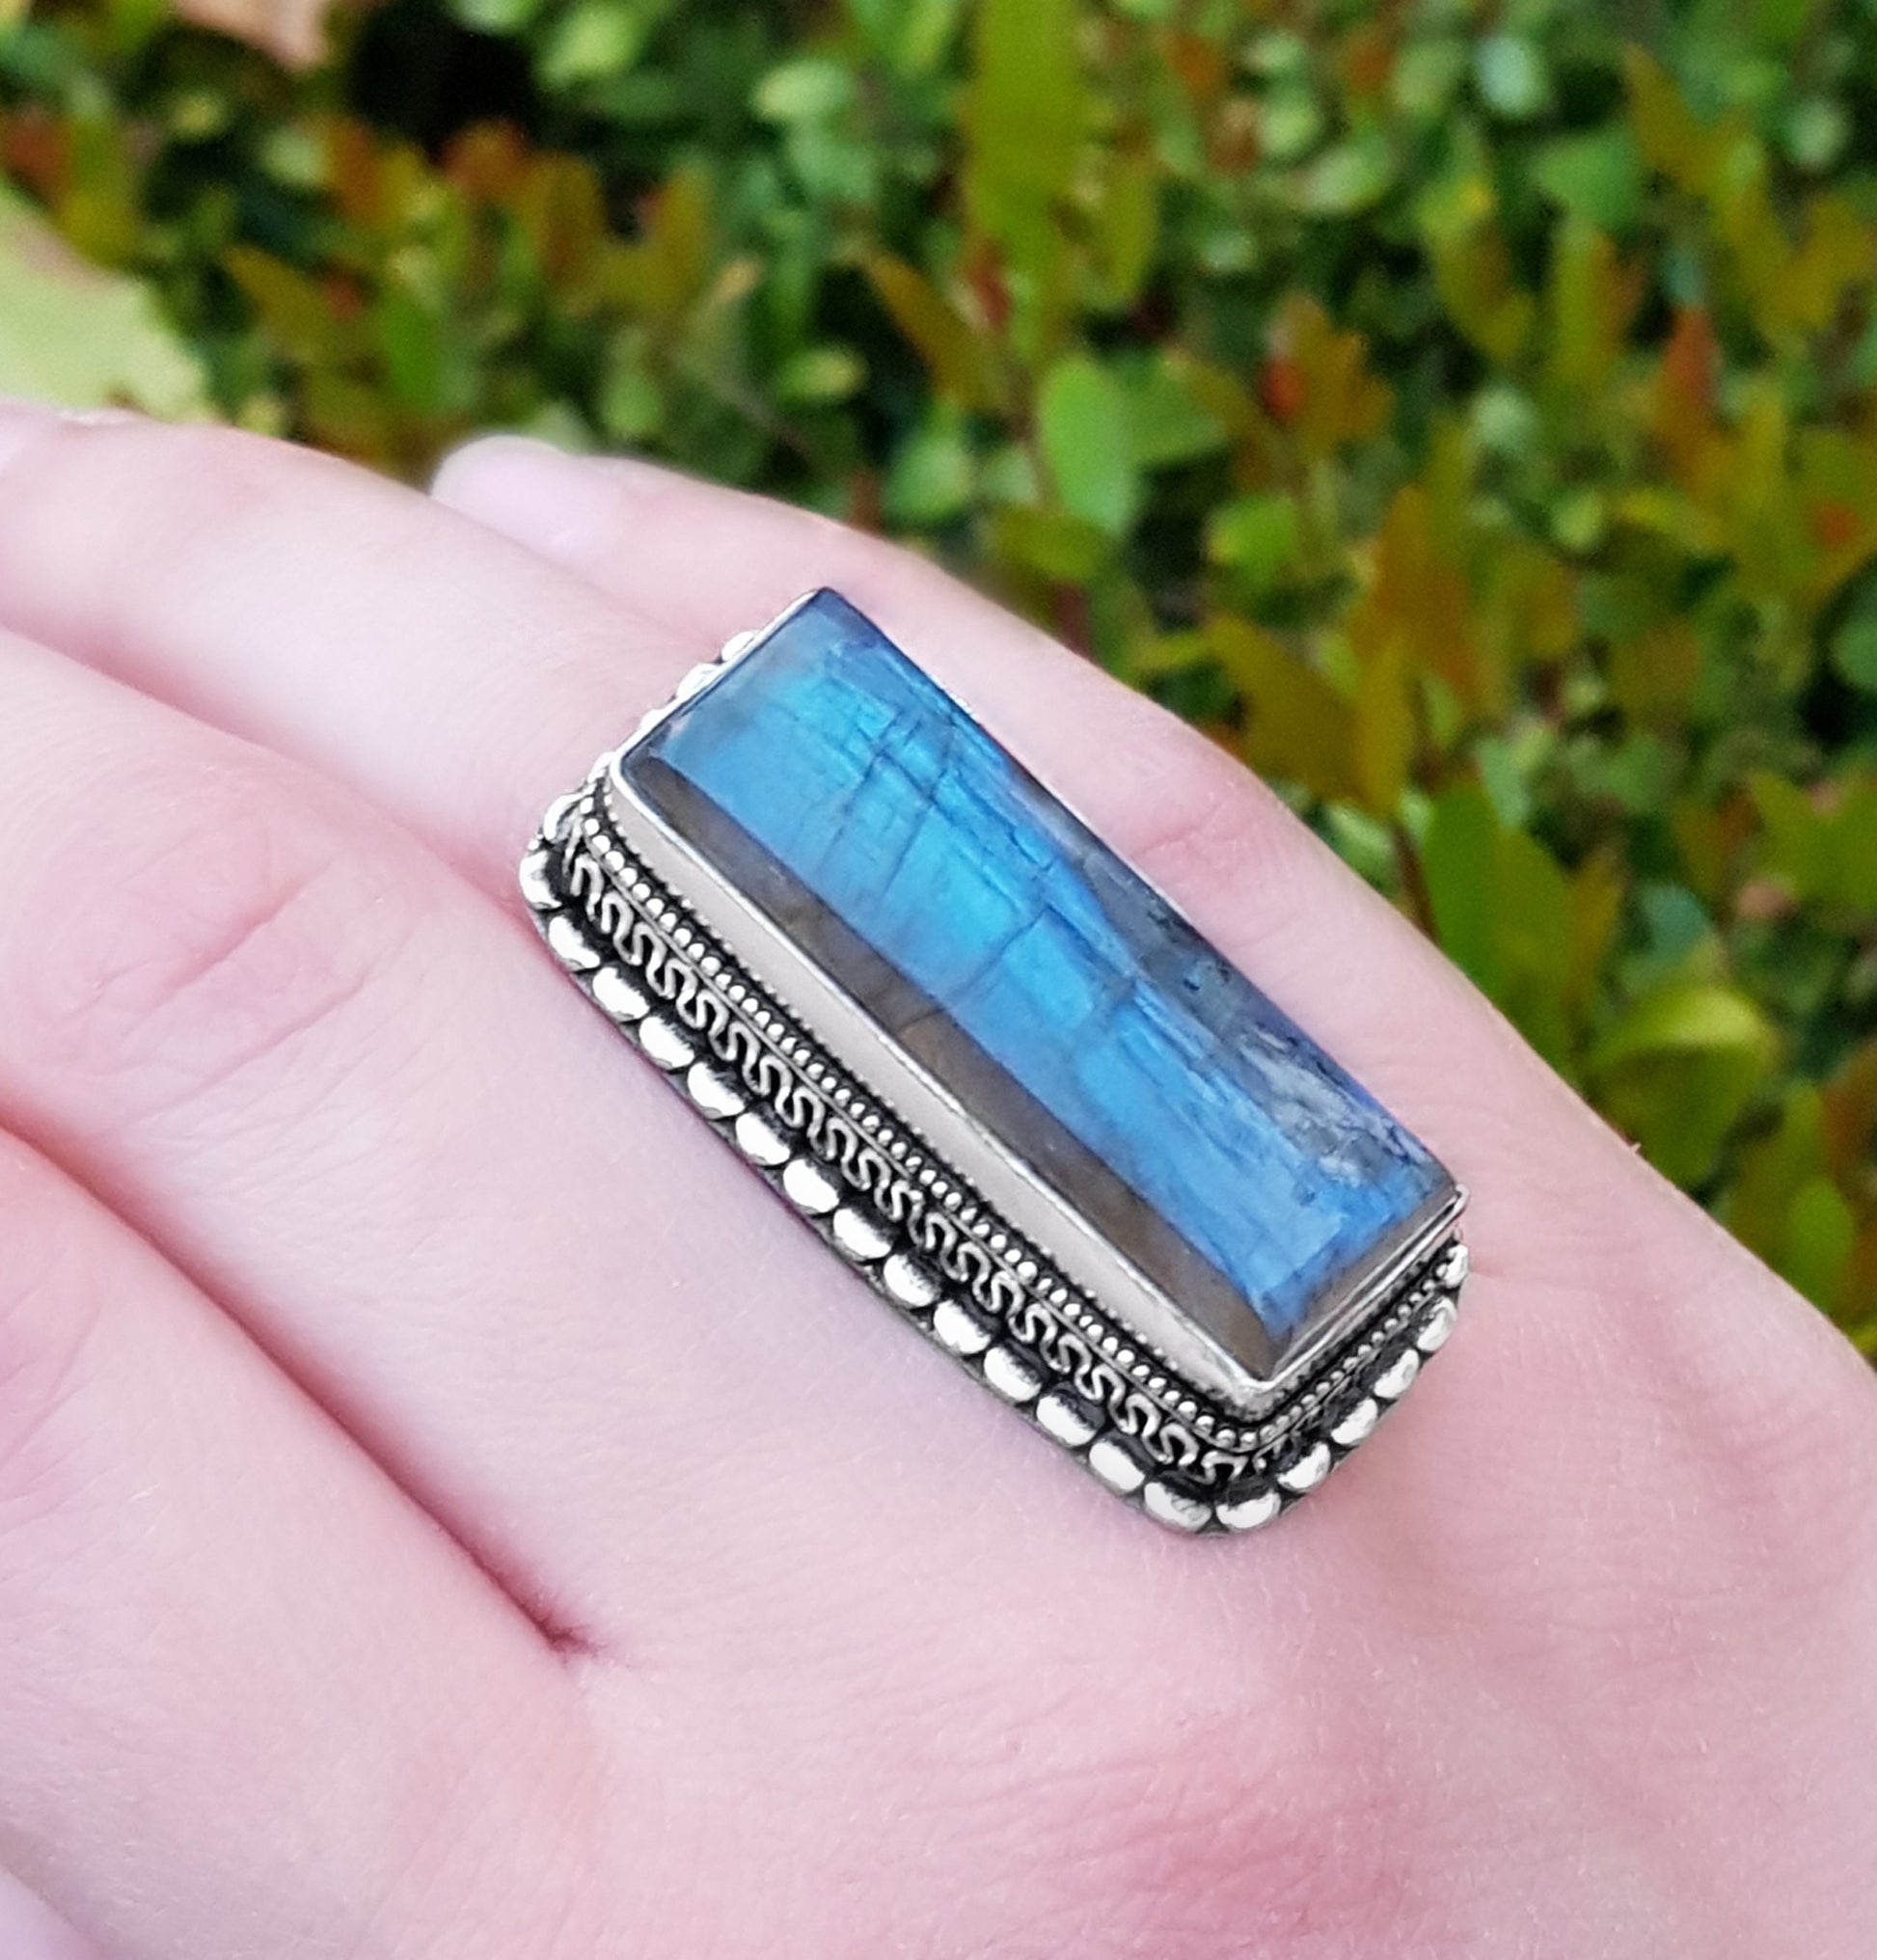 Top Quality Blue Labradorite Ring In Sterling Silver Statement Ring Size US 7 1/4 Boho Ring GypsyJewelry Unique Gift For Women